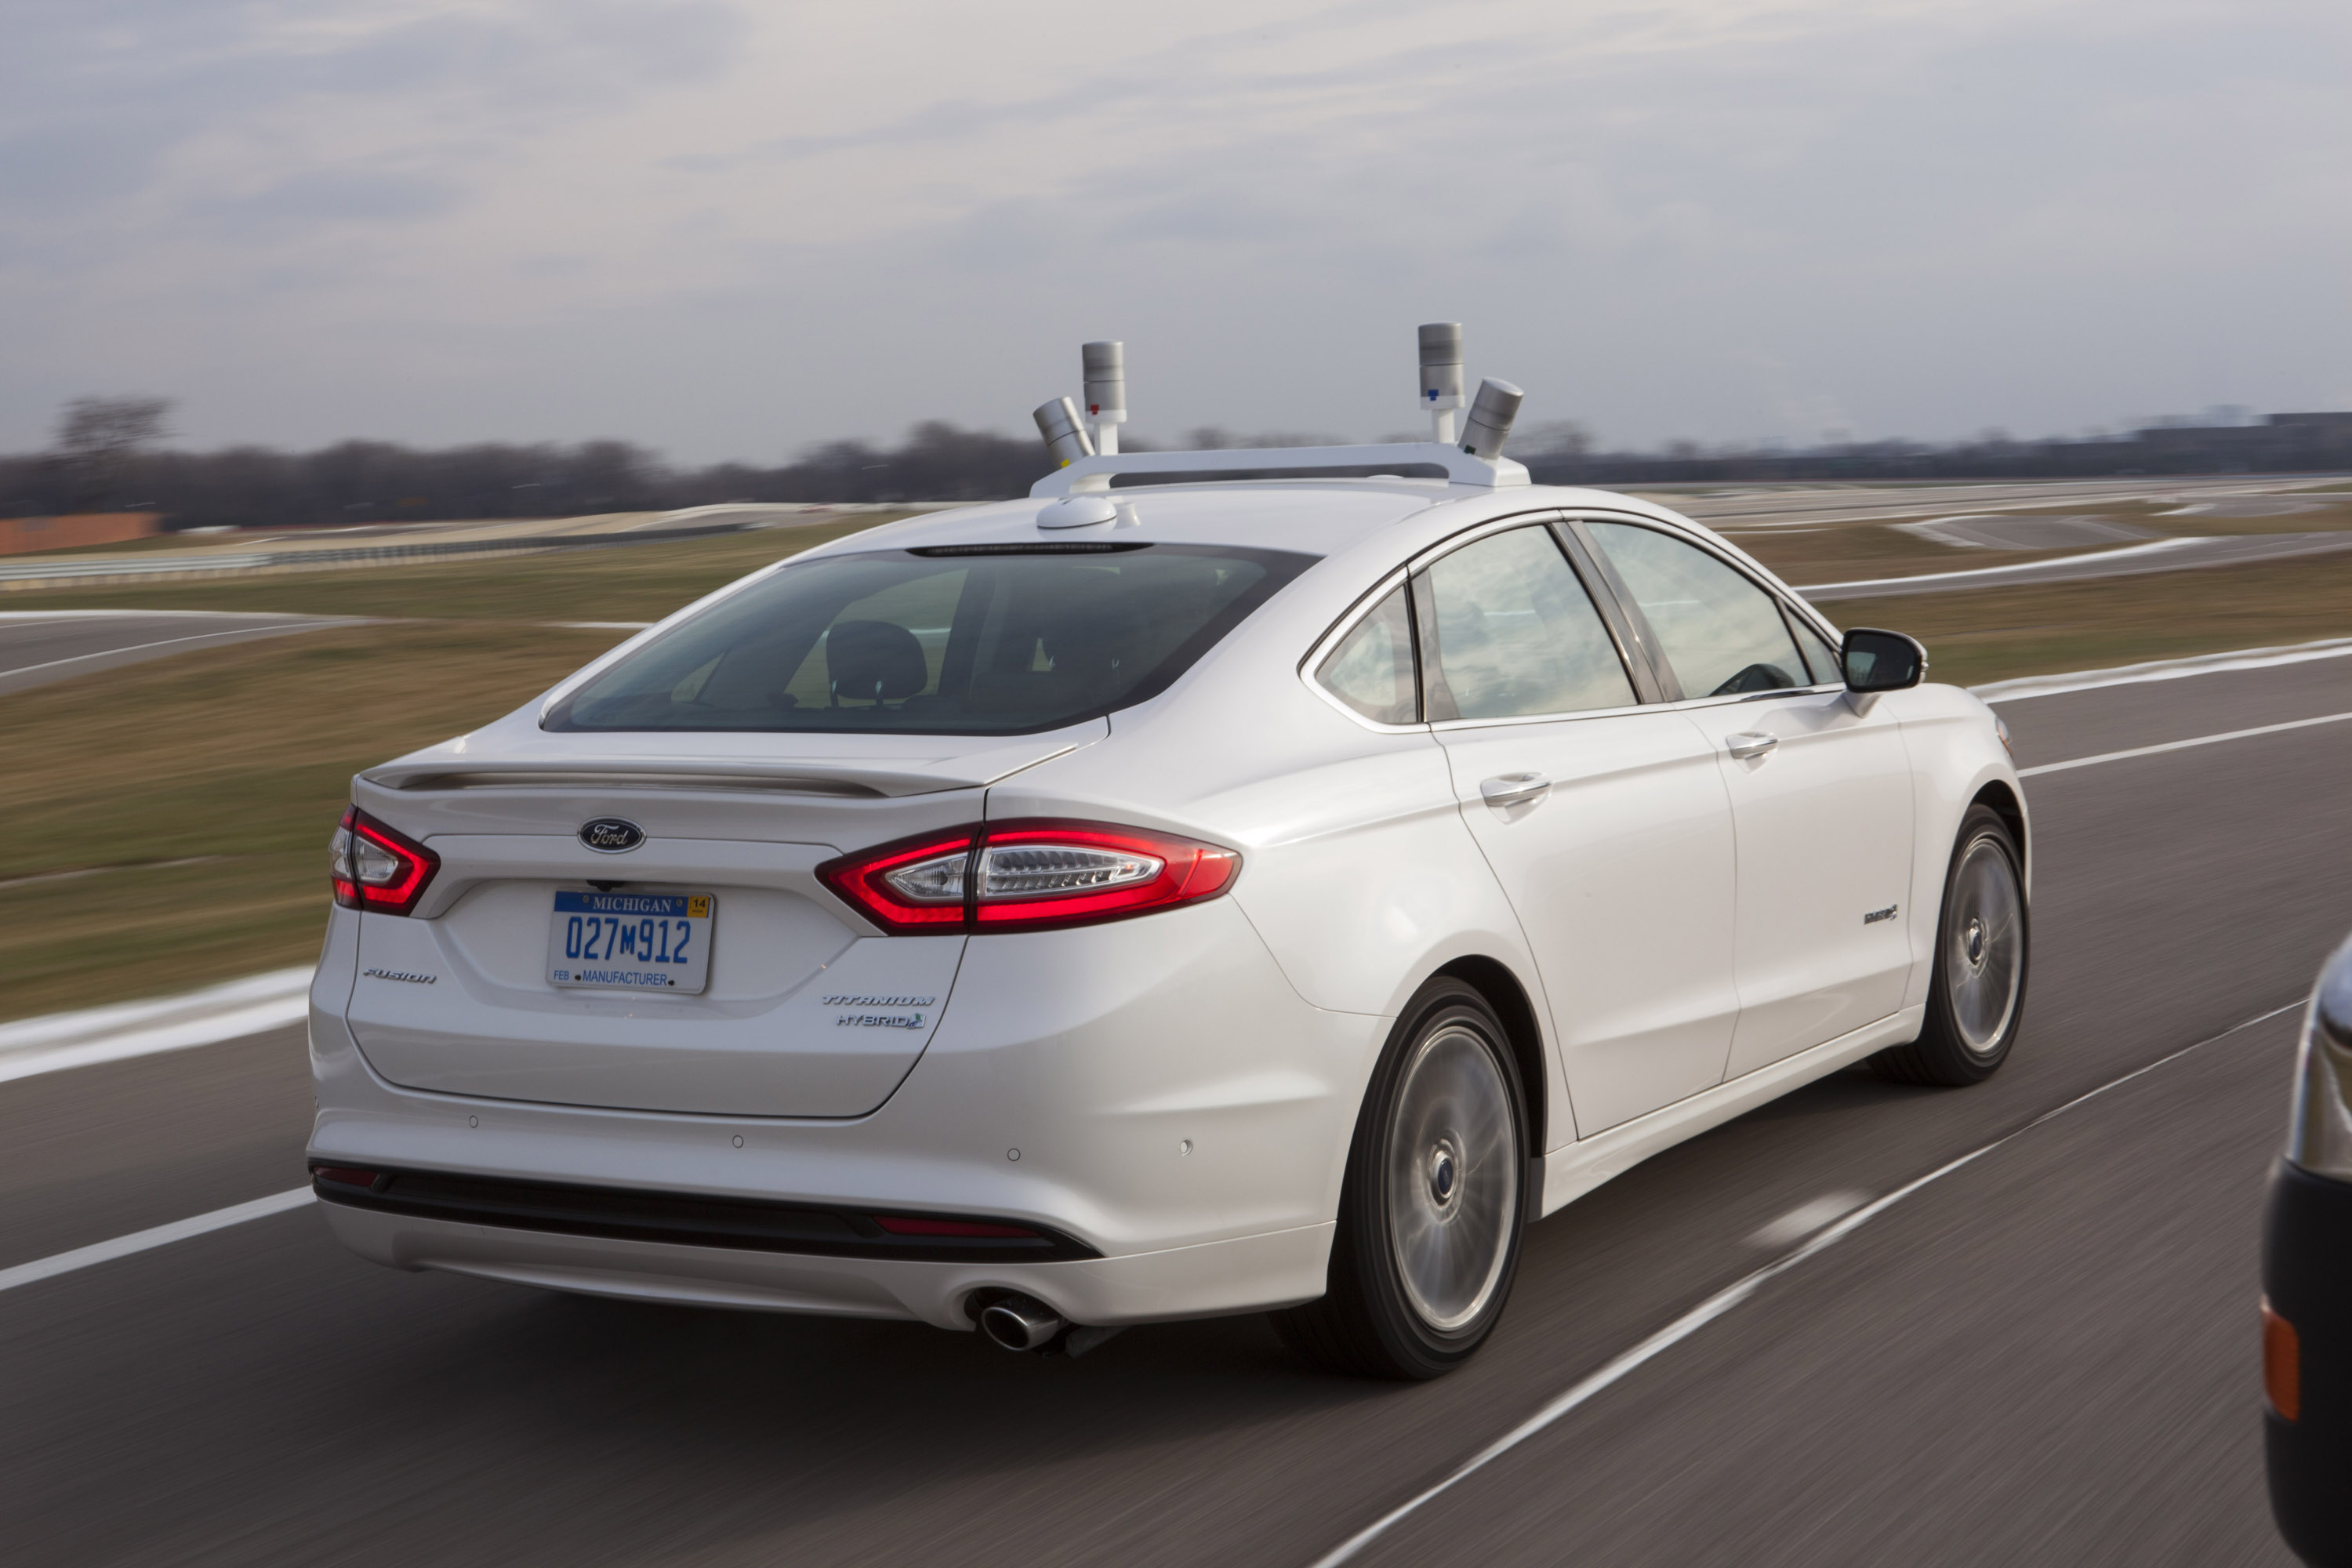 Ford Fusion Hybrid Automated Vehicle